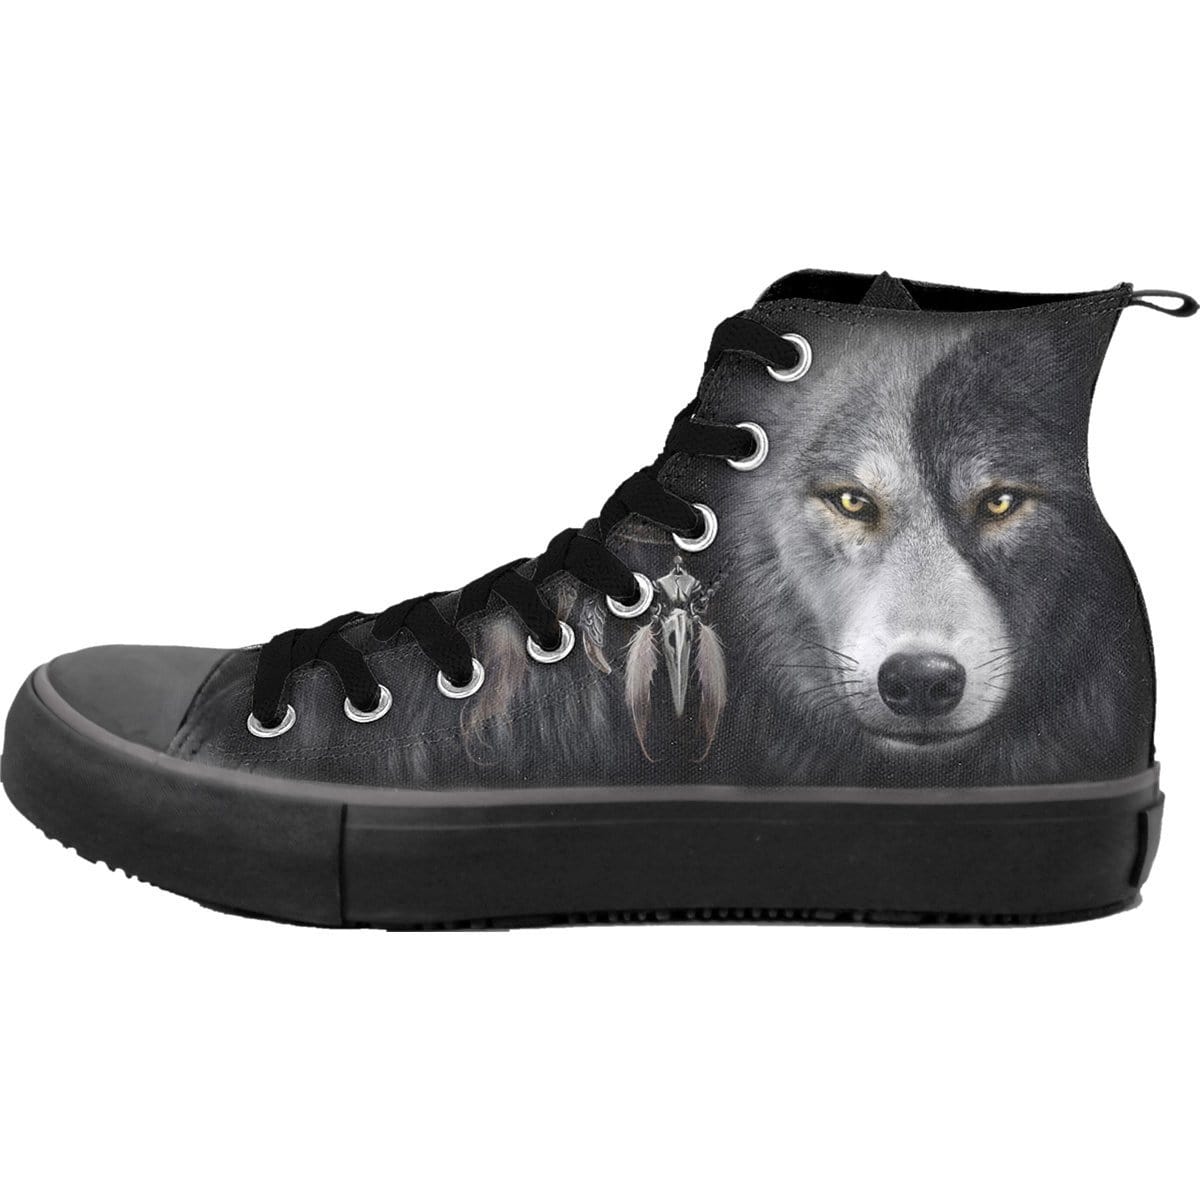 WOLF CHI - Sneakers - Men's High Top Laceup - Spiral USA